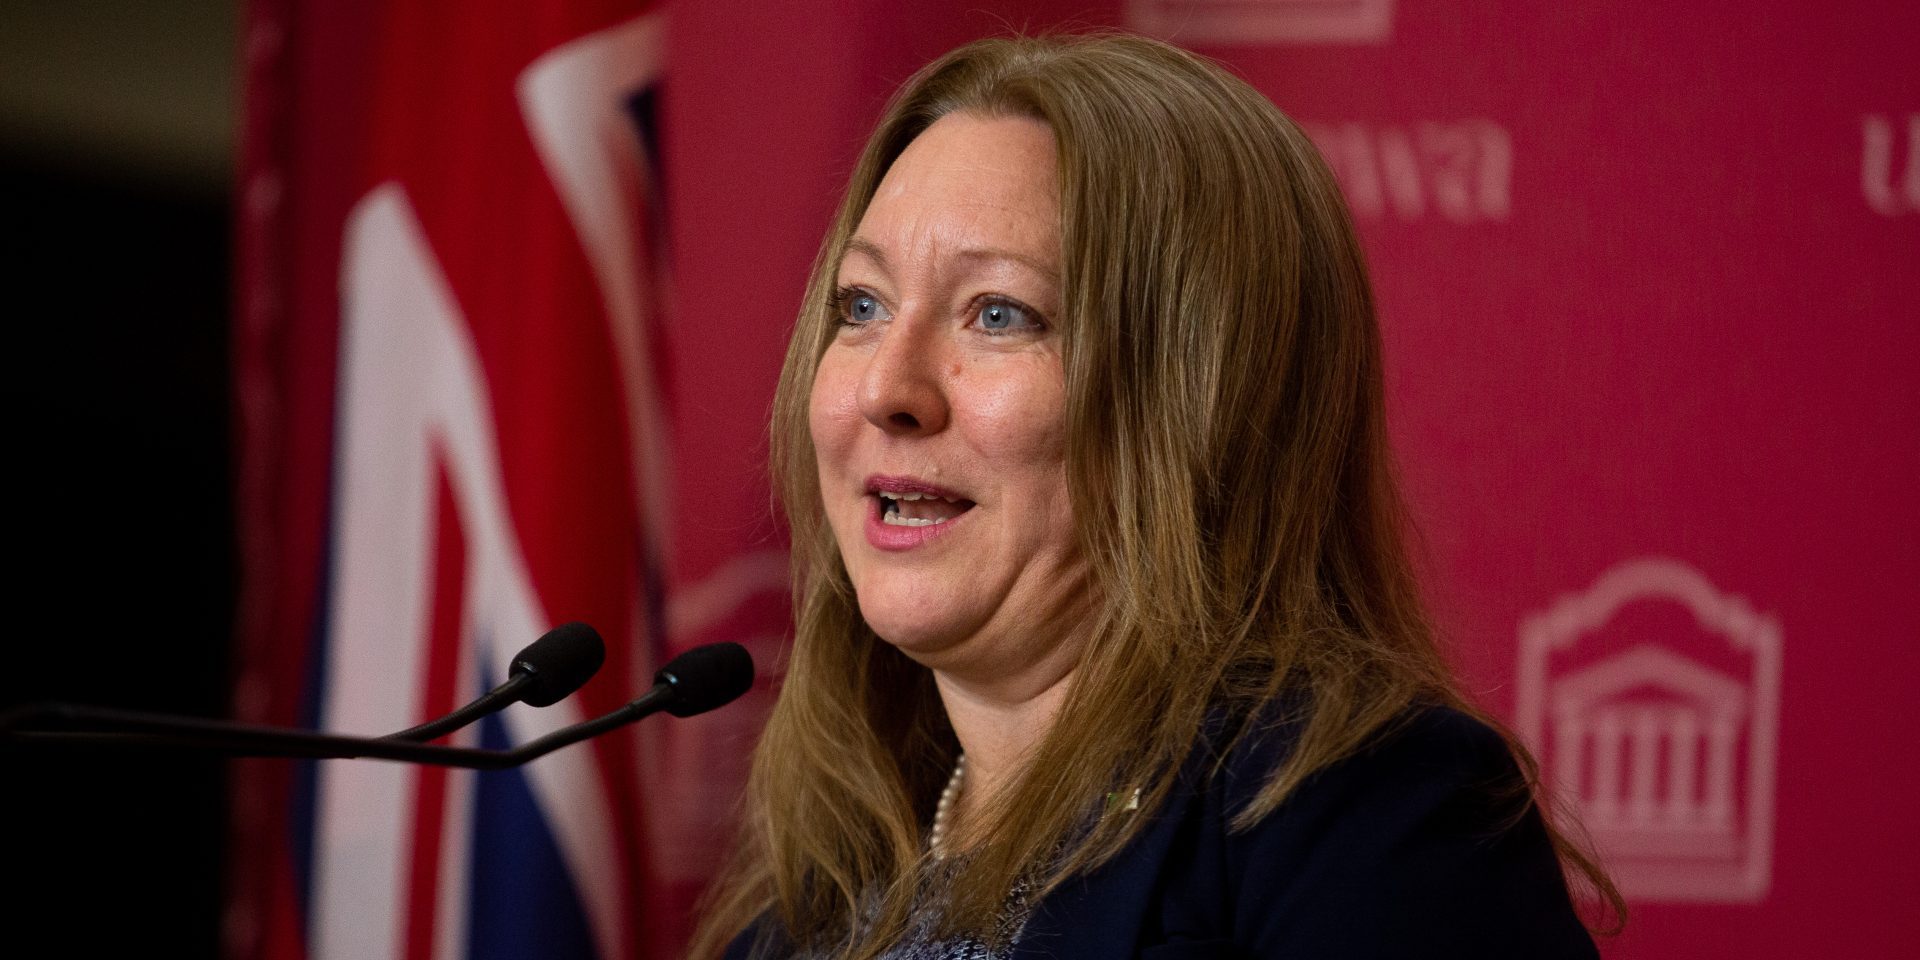 President of the Treasury Board Mona Fortier takes part in a news conference on Wednesday to announce an investment at the University Ottawa on Feb. 15, 2023, that will help the university create a number of French language programs of study. The Hill Times photograph by Andrew Meade